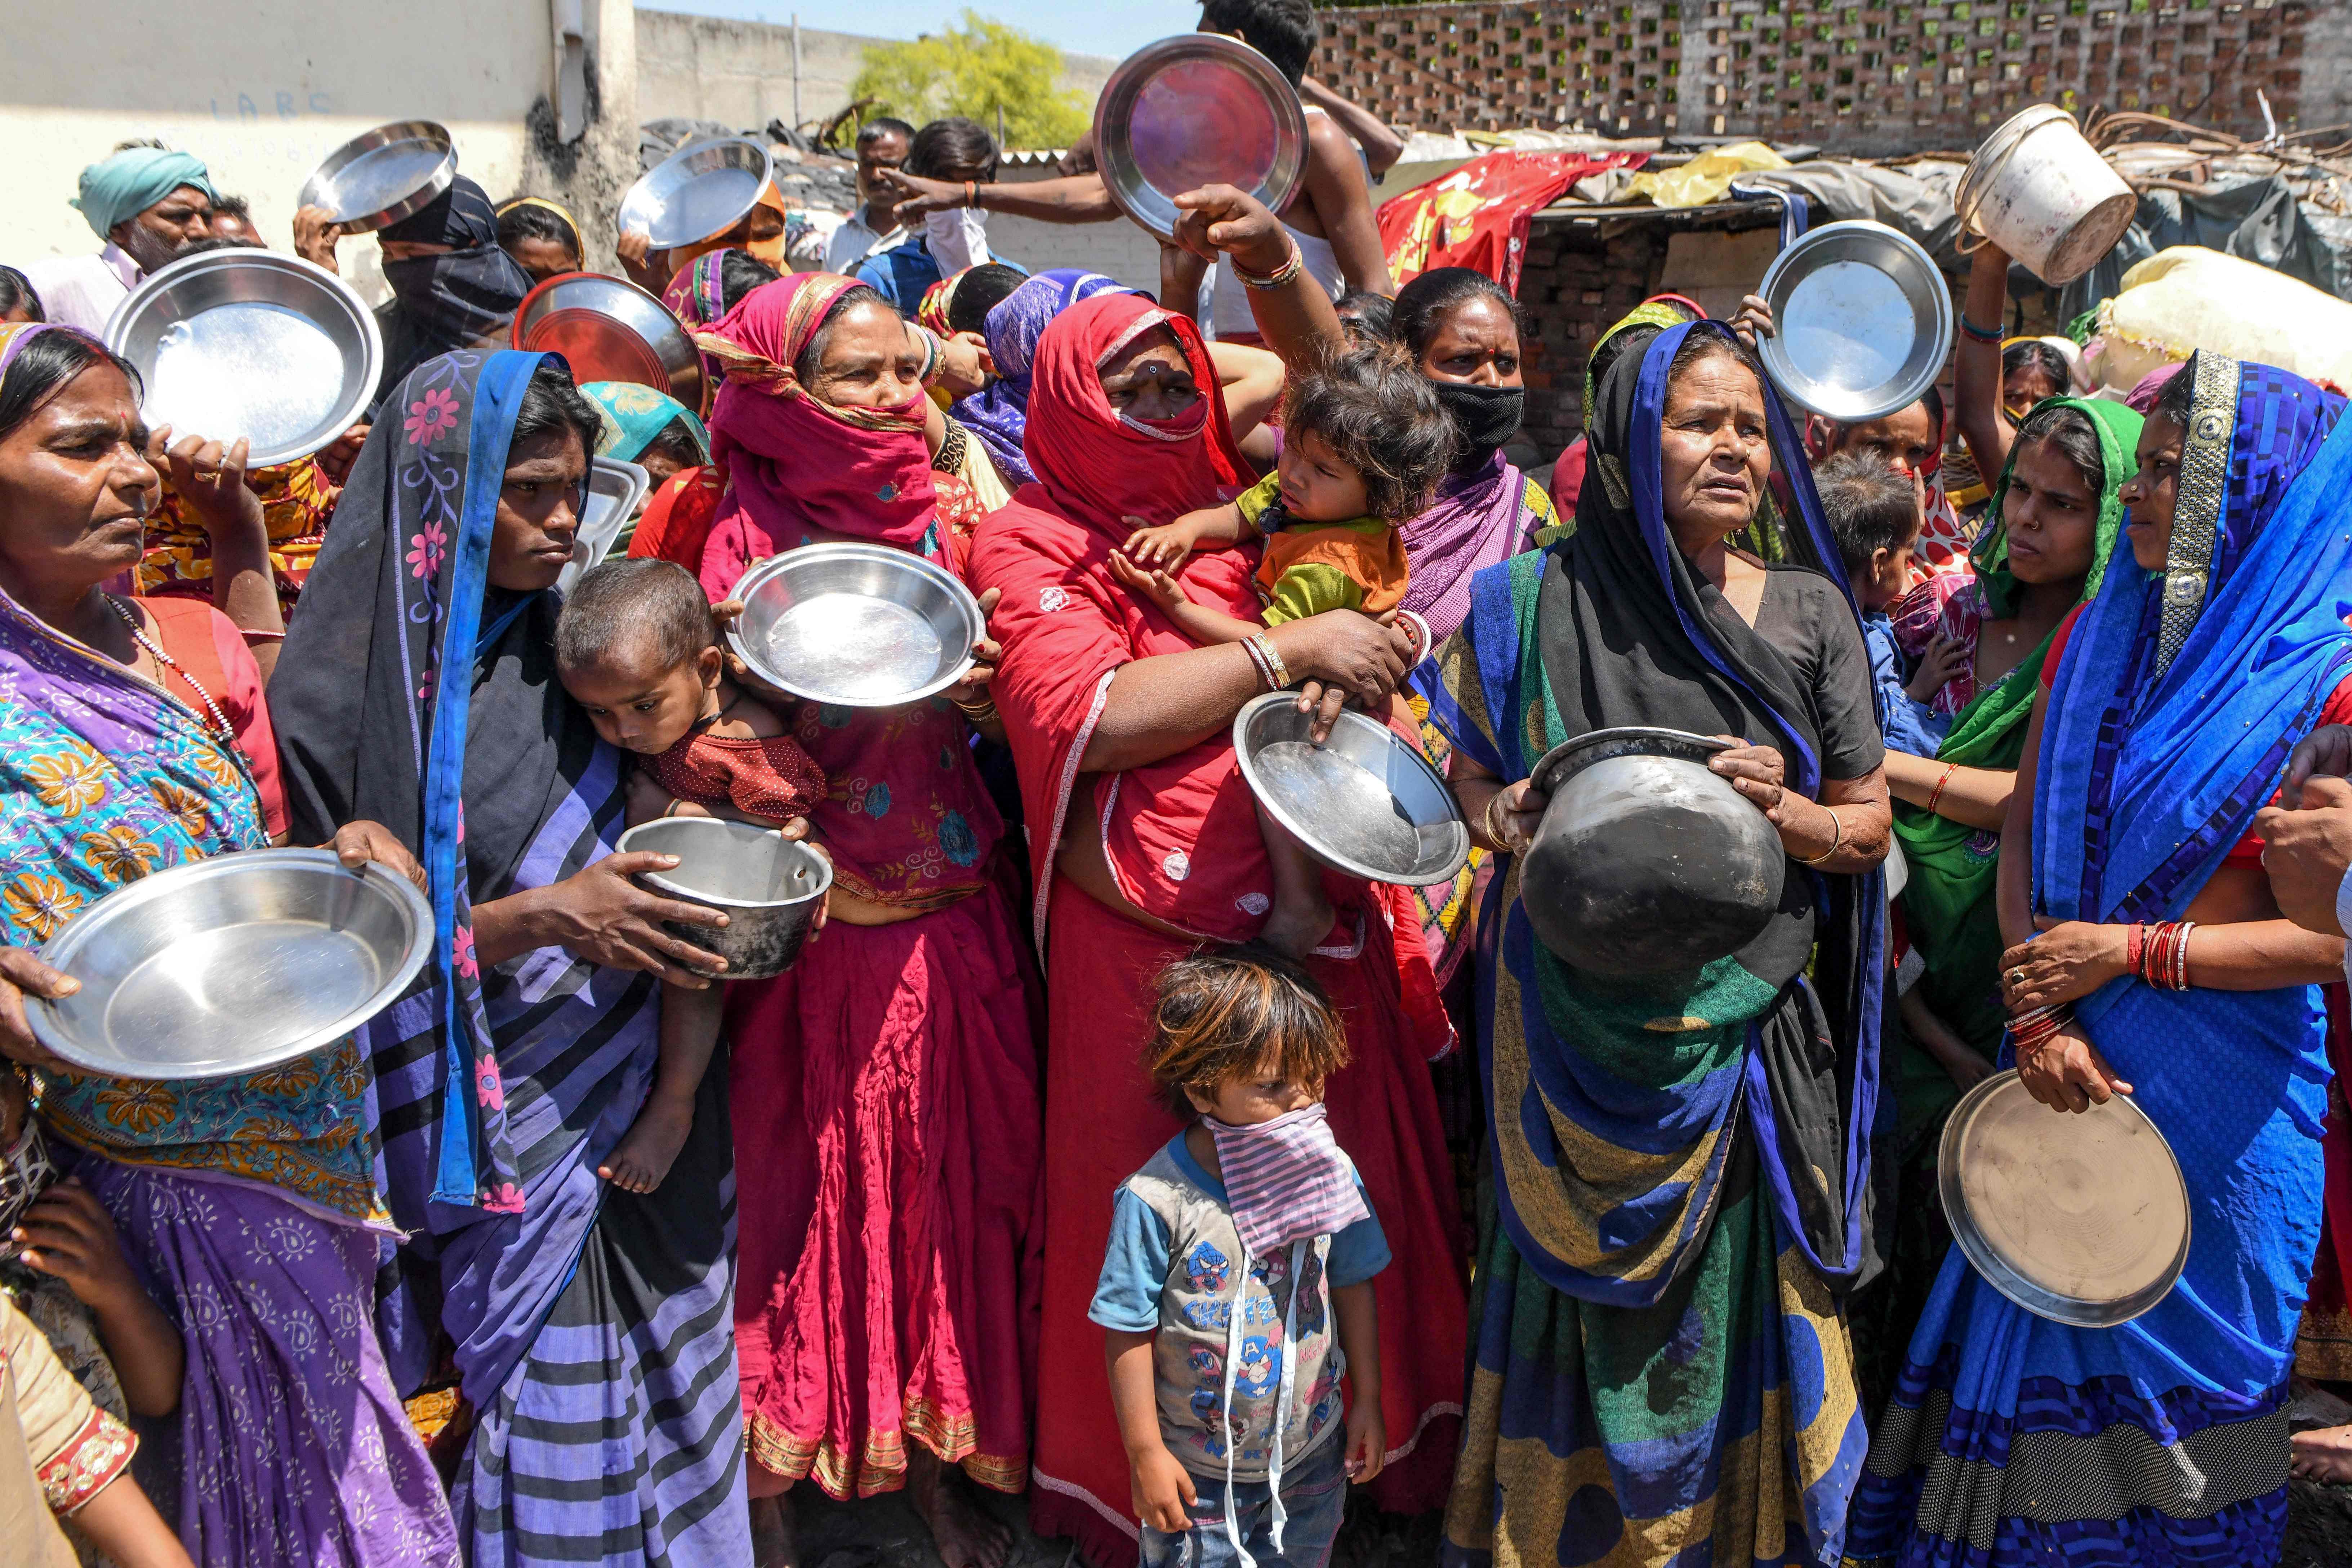 Migrant labourers and families from Bihar and Uttar Pradesh states hold kitchen utensils as they protest against the government for the lack of food at a slum area during a government-imposed nationwide lockdown as a preventive measure against the Covid-19, in Amritsar on April 22, 2020. Credit: AFP File Photo